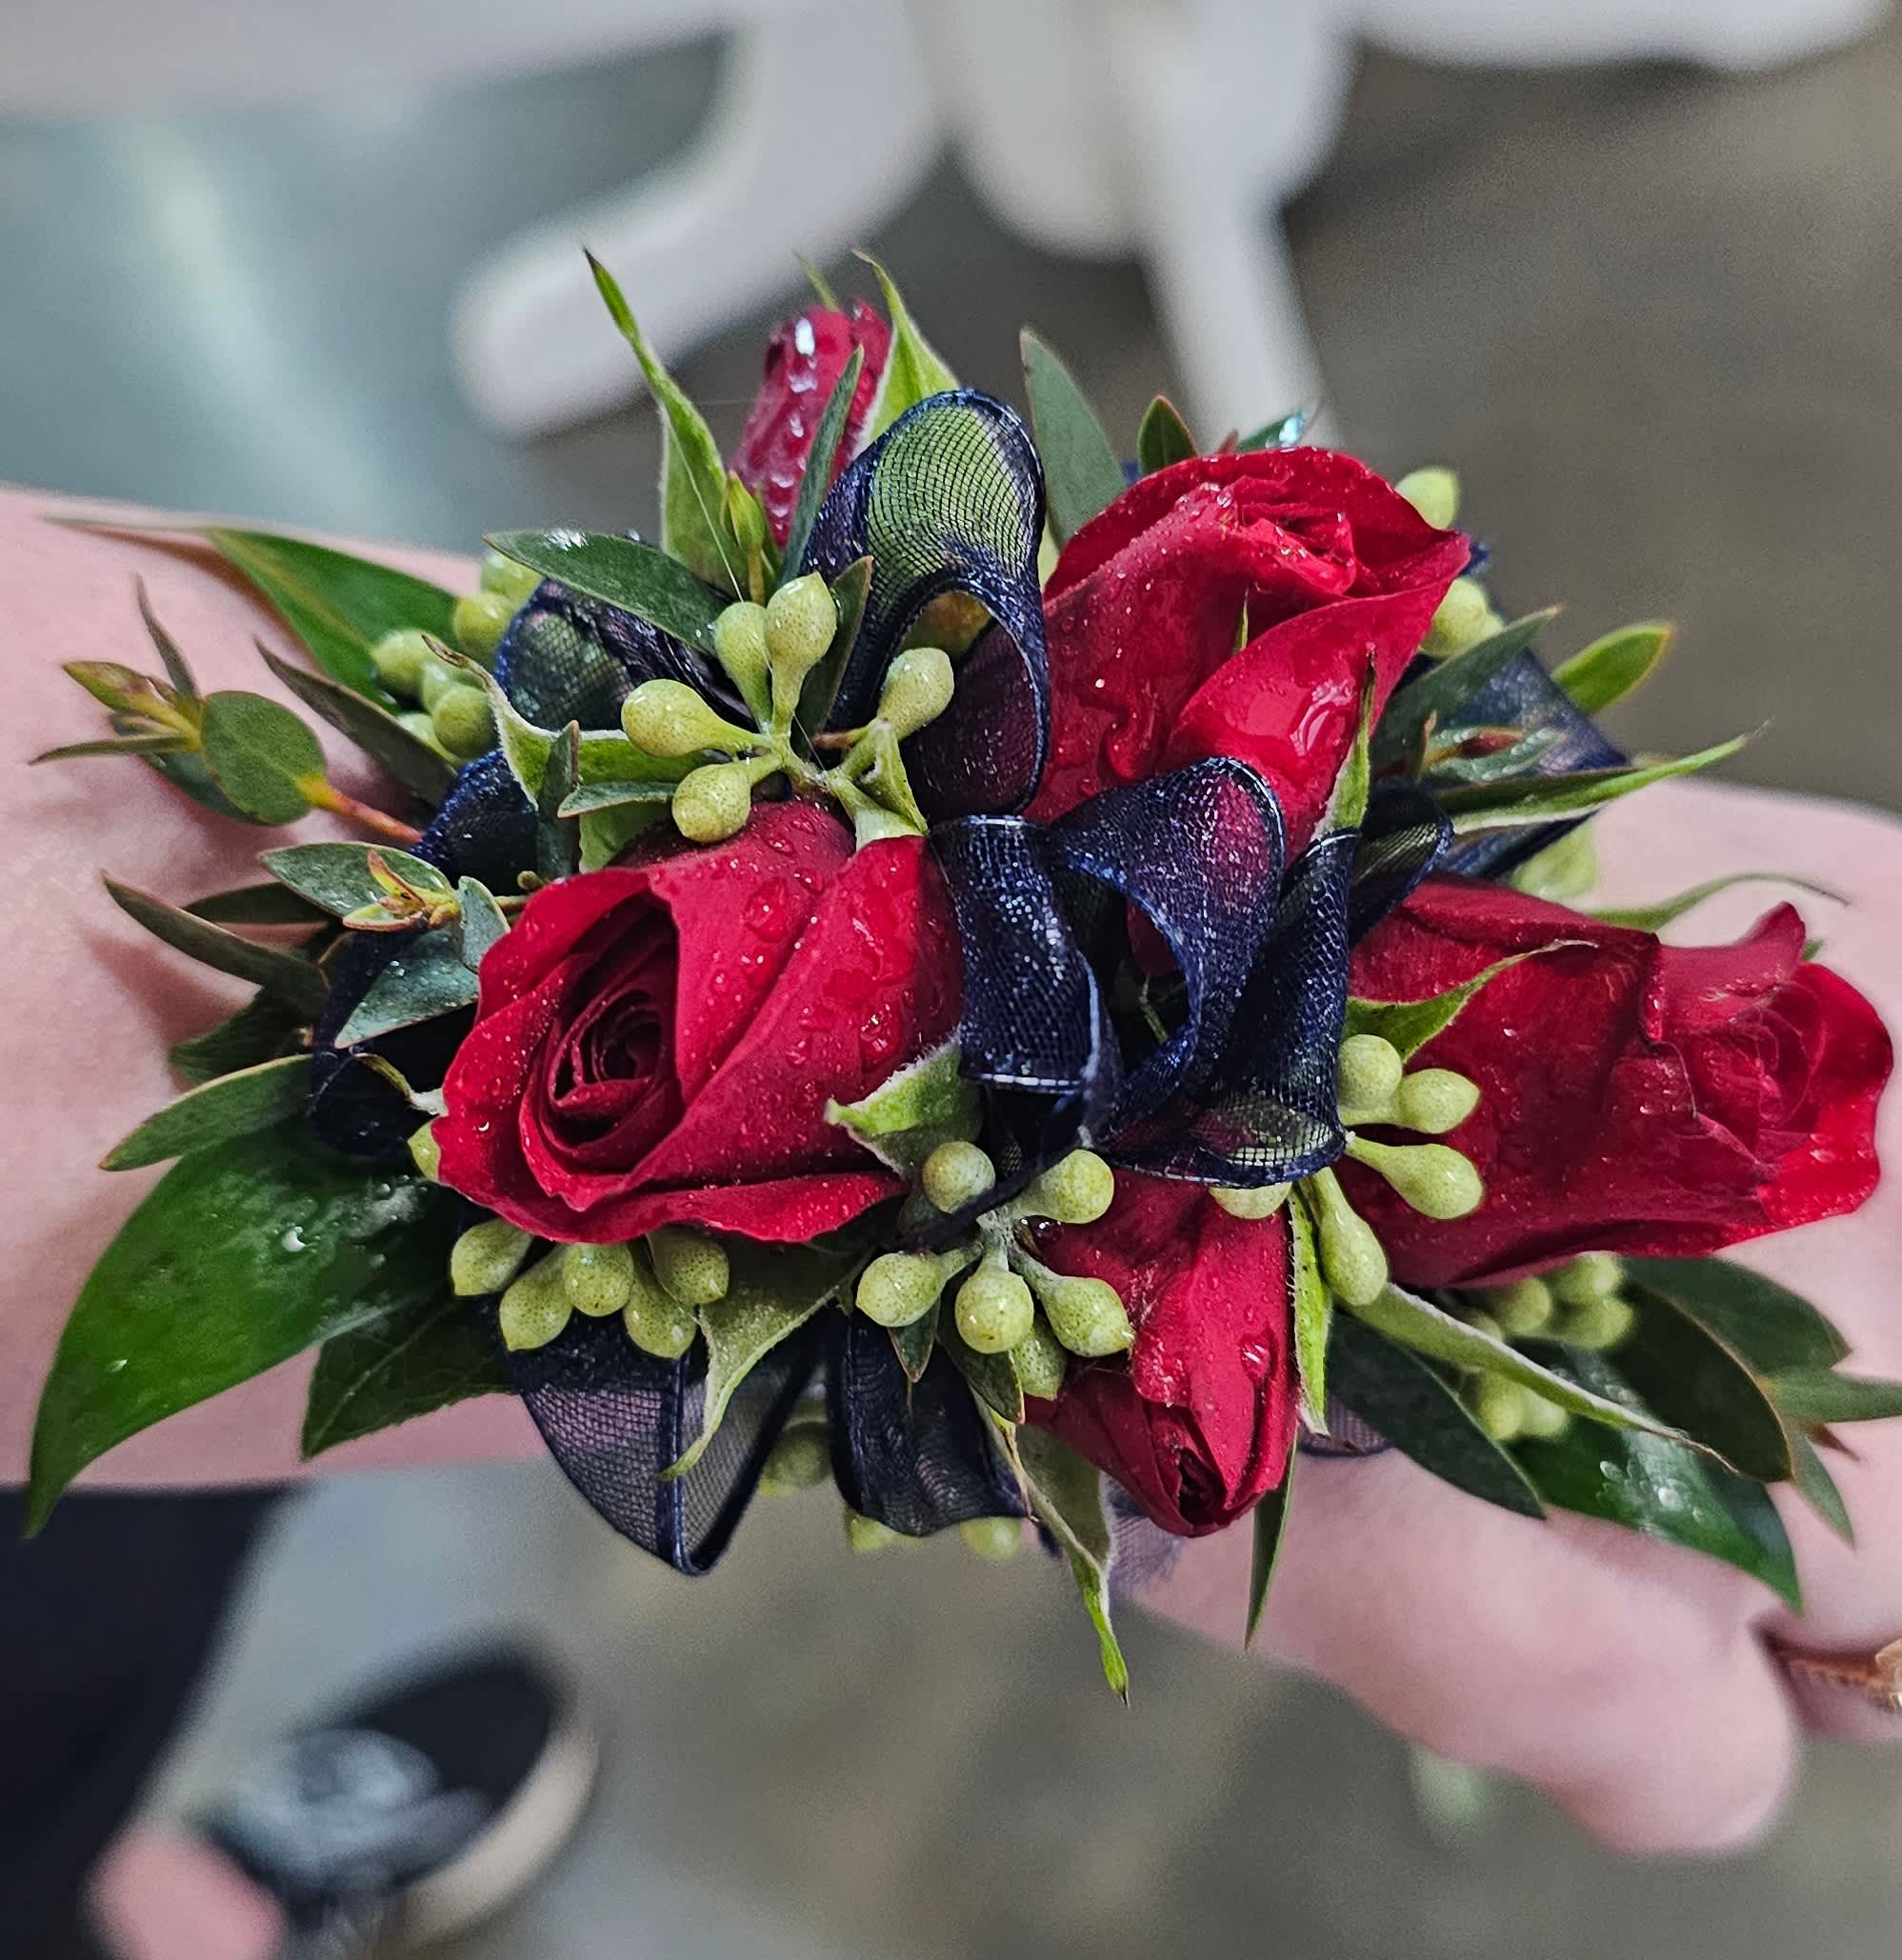 Corsage Prom Special Spray roses with greenery Please send colors and inspiration pictures to flowers@theforevermorefarm.com - Prom Special with Free boutonniere to match. Please send specific colors and inspiration pictures to flowers@theforevermorefarm.com